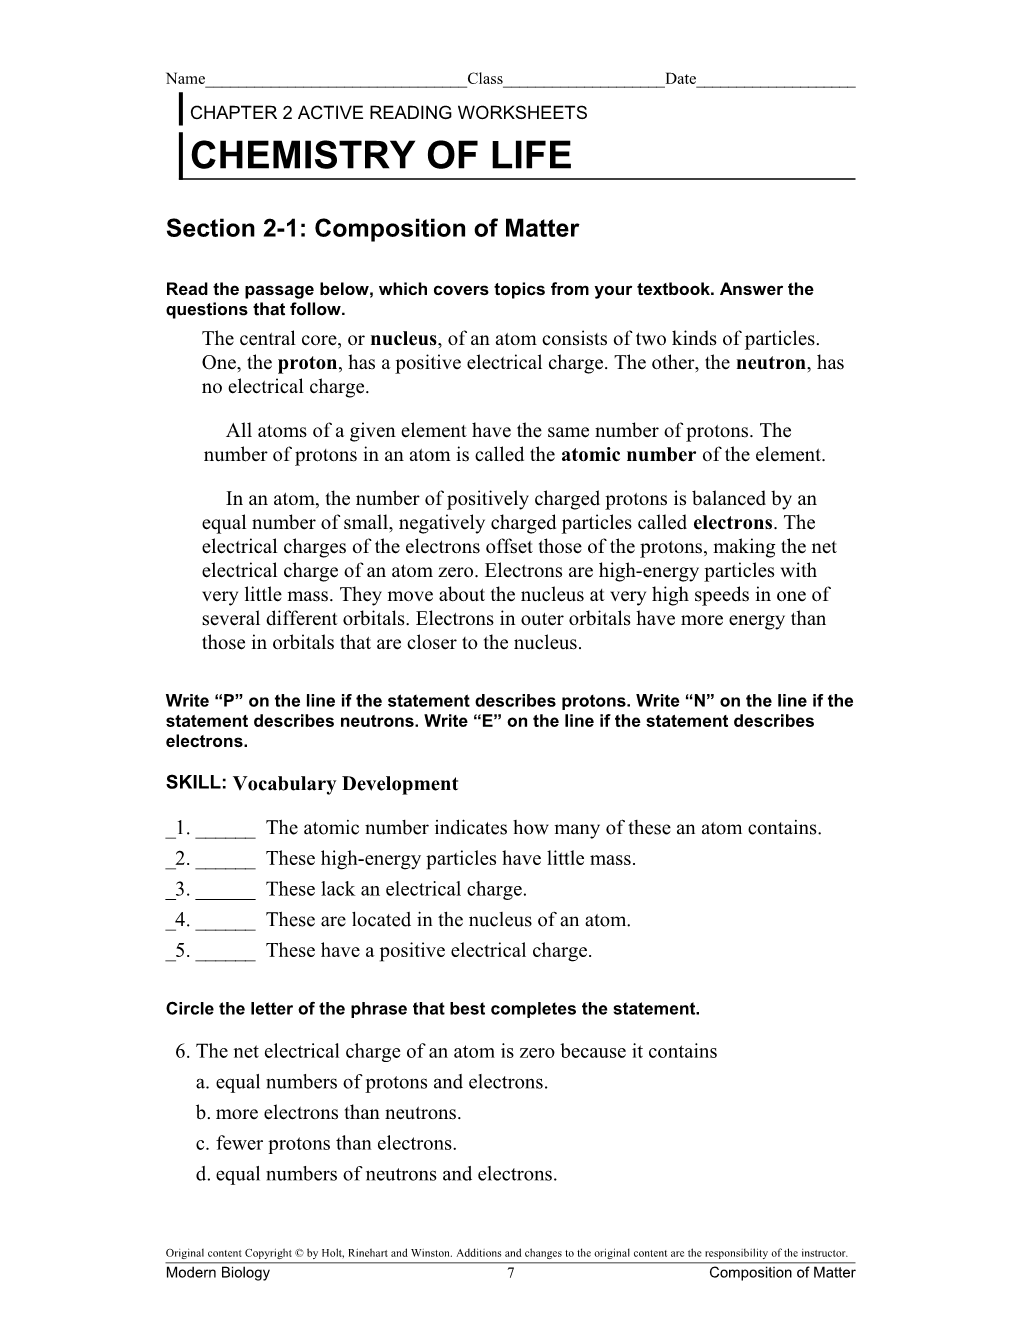 Active Reading Worksheets s2